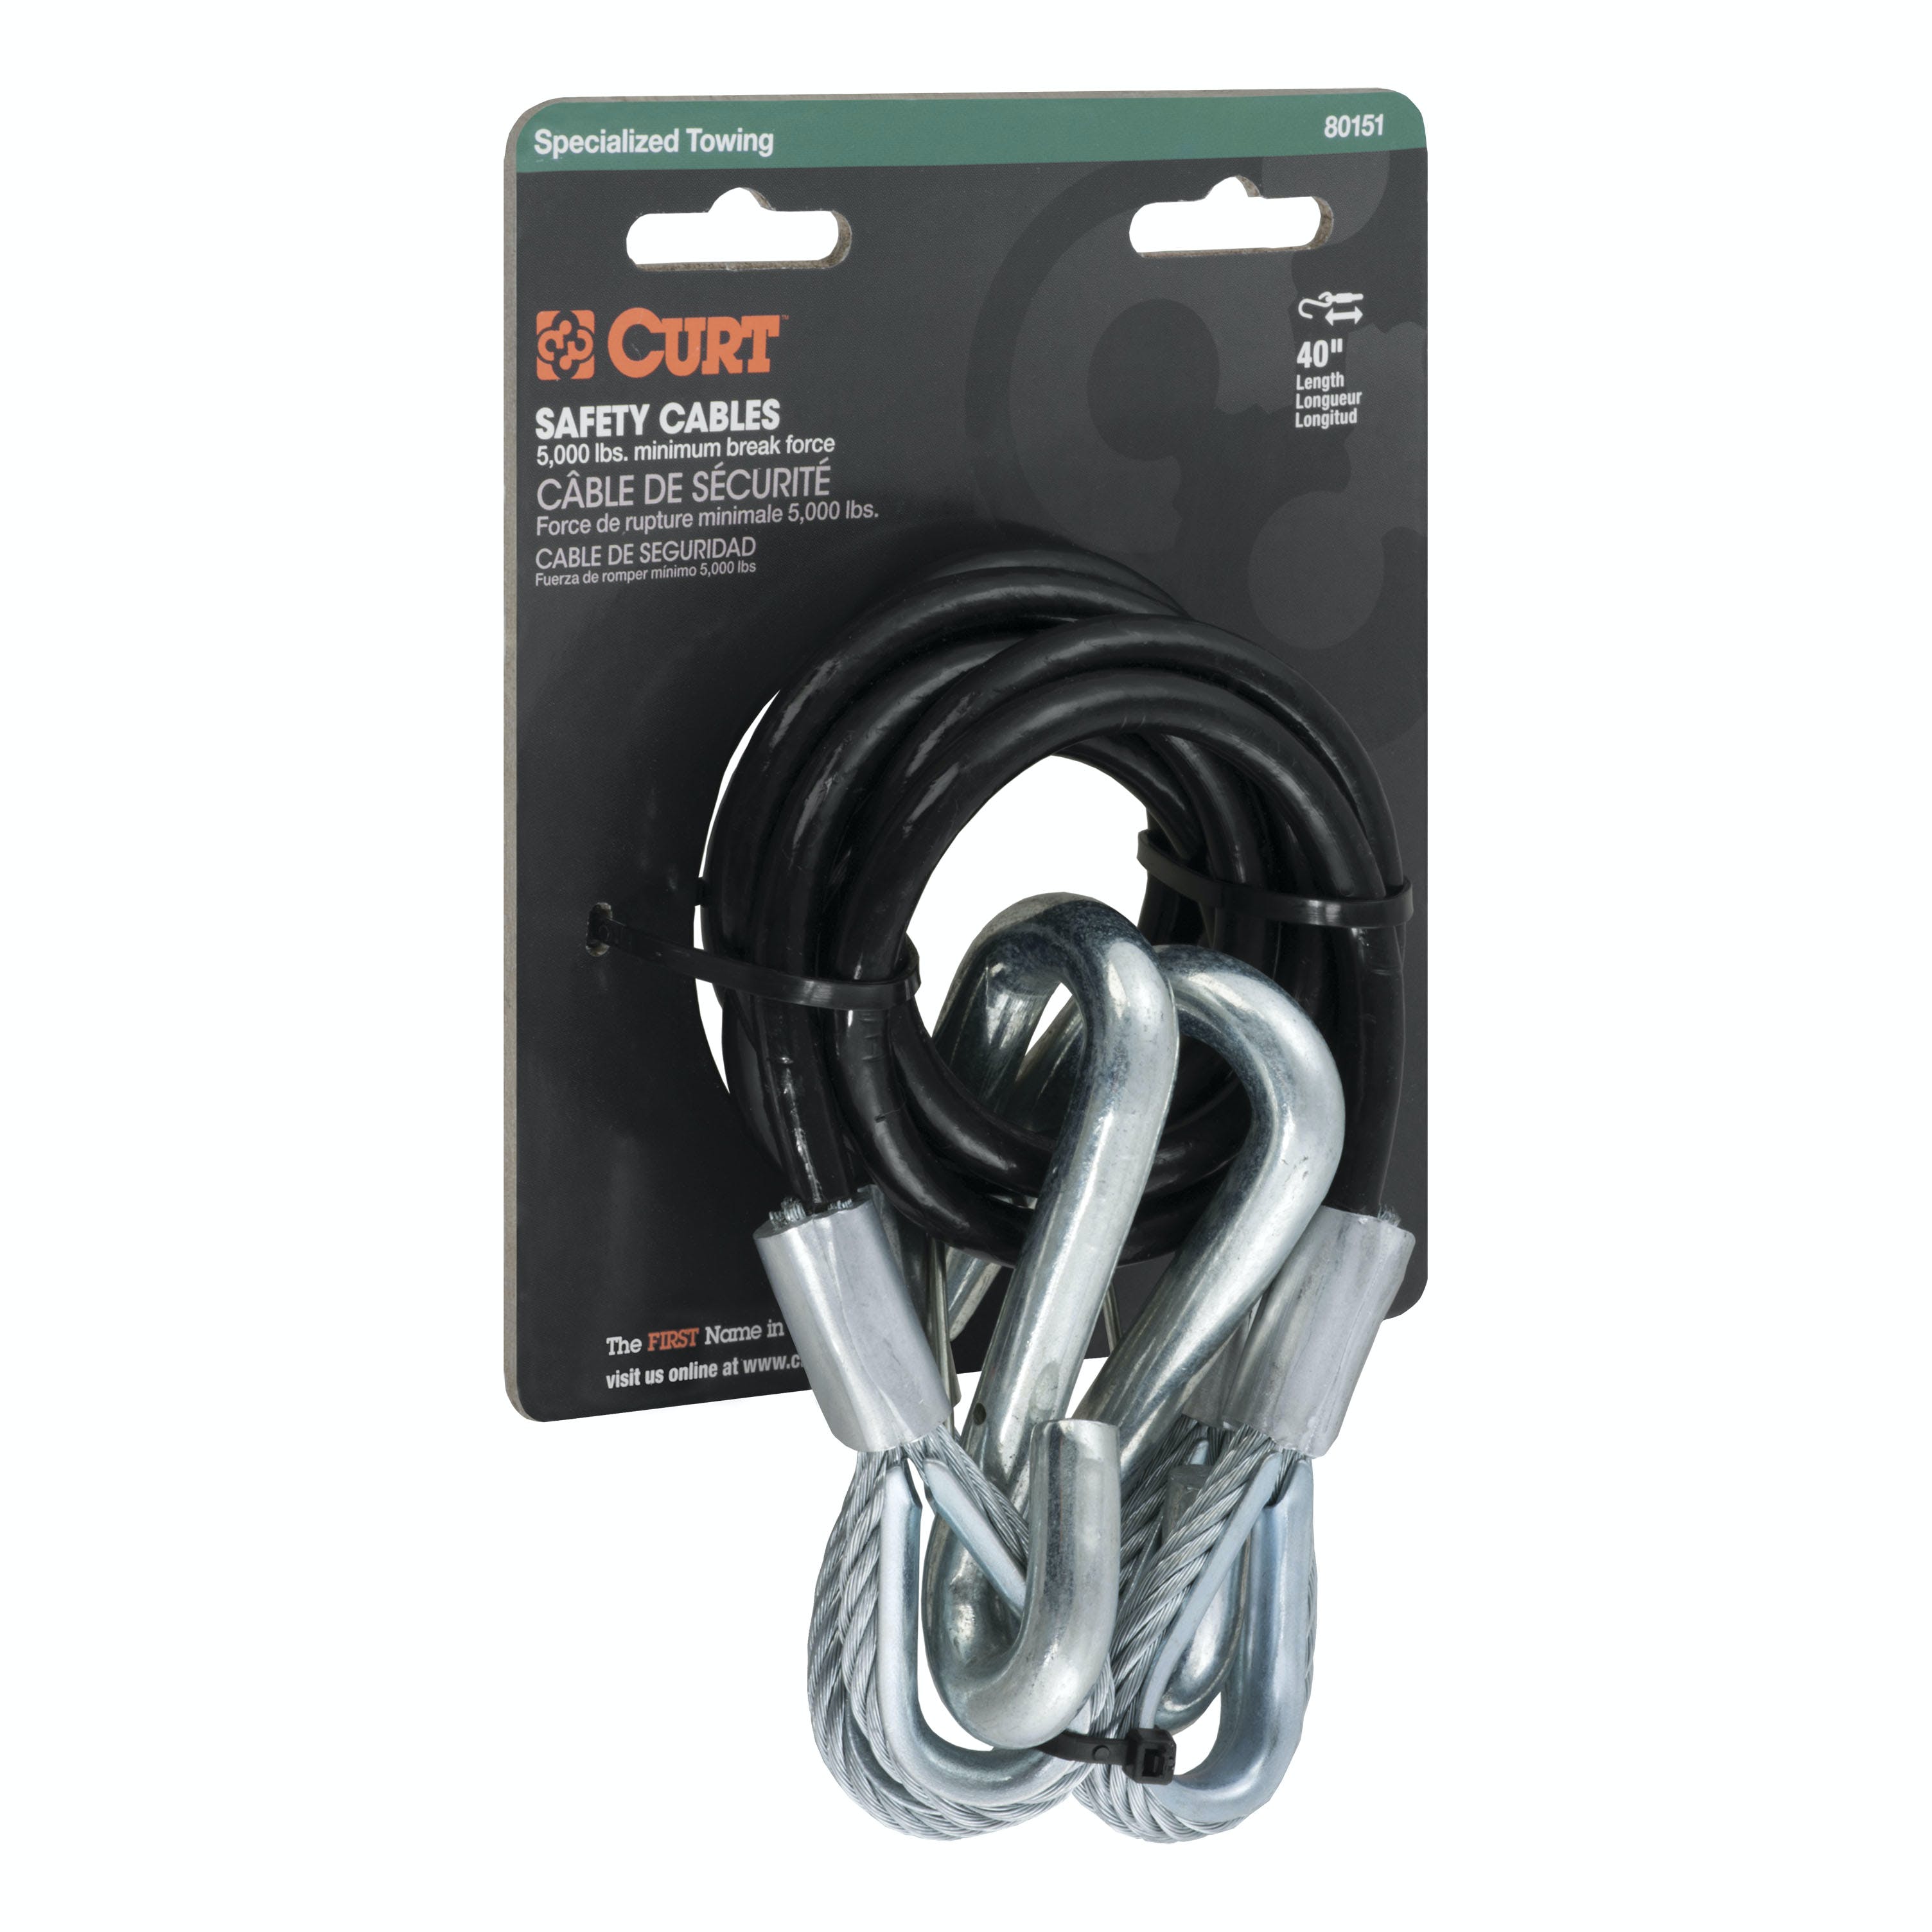 CURT 80151 44-1/2 Safety Cables with 2 Snap Hooks (5,000 lbs, Vinyl-Coated, 2-Pack)